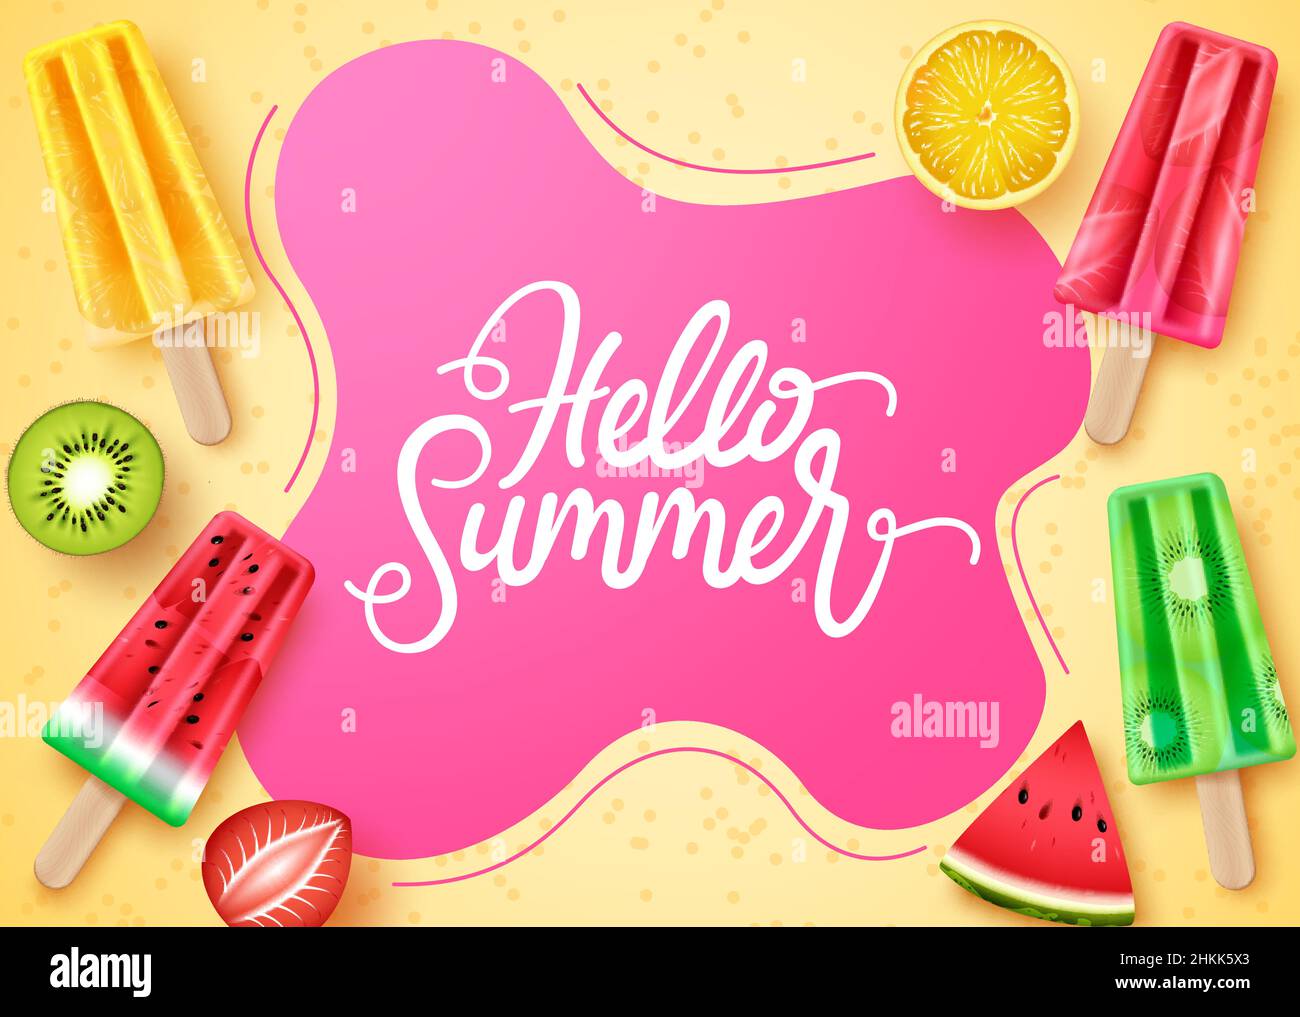 Summer greeting vector template design. Hello summer text in beach sand with popsicles dessert and fruits elements for relax and enjoy tropical. Stock Vector